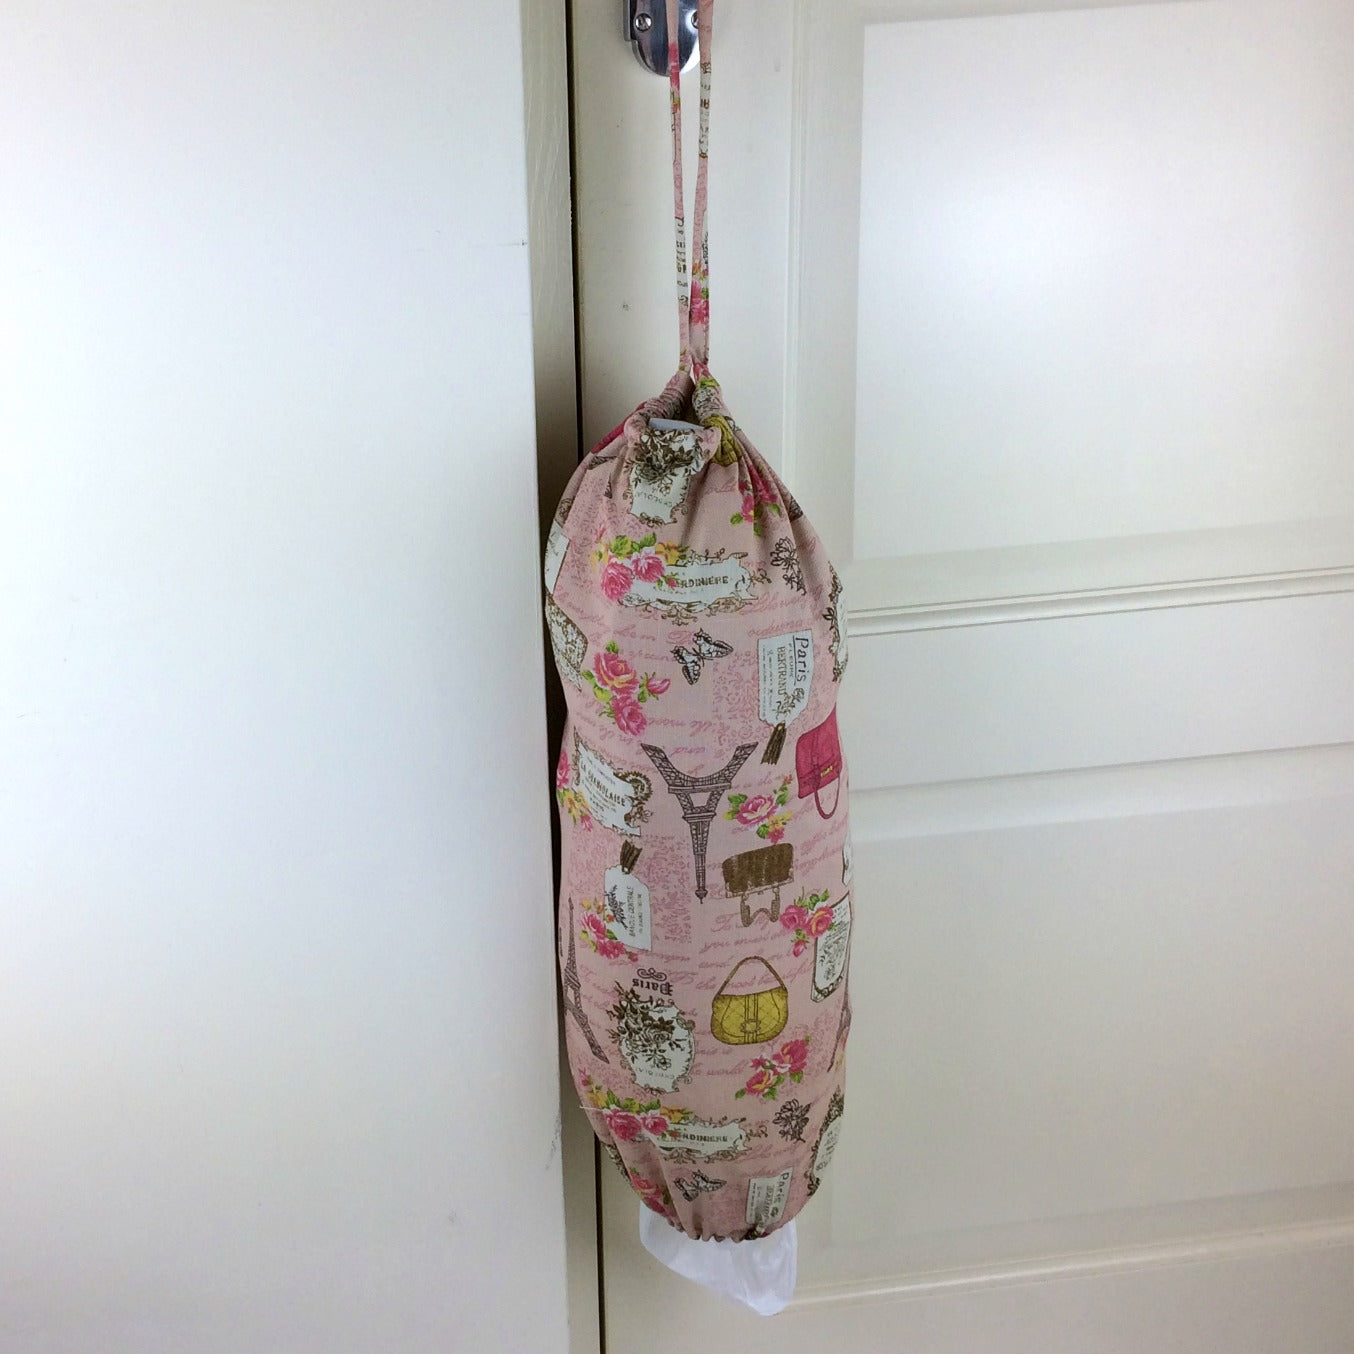 plastic bag dispenser and holder for those pesky bags for life that take over this one is a pink paris theme canvas fabric